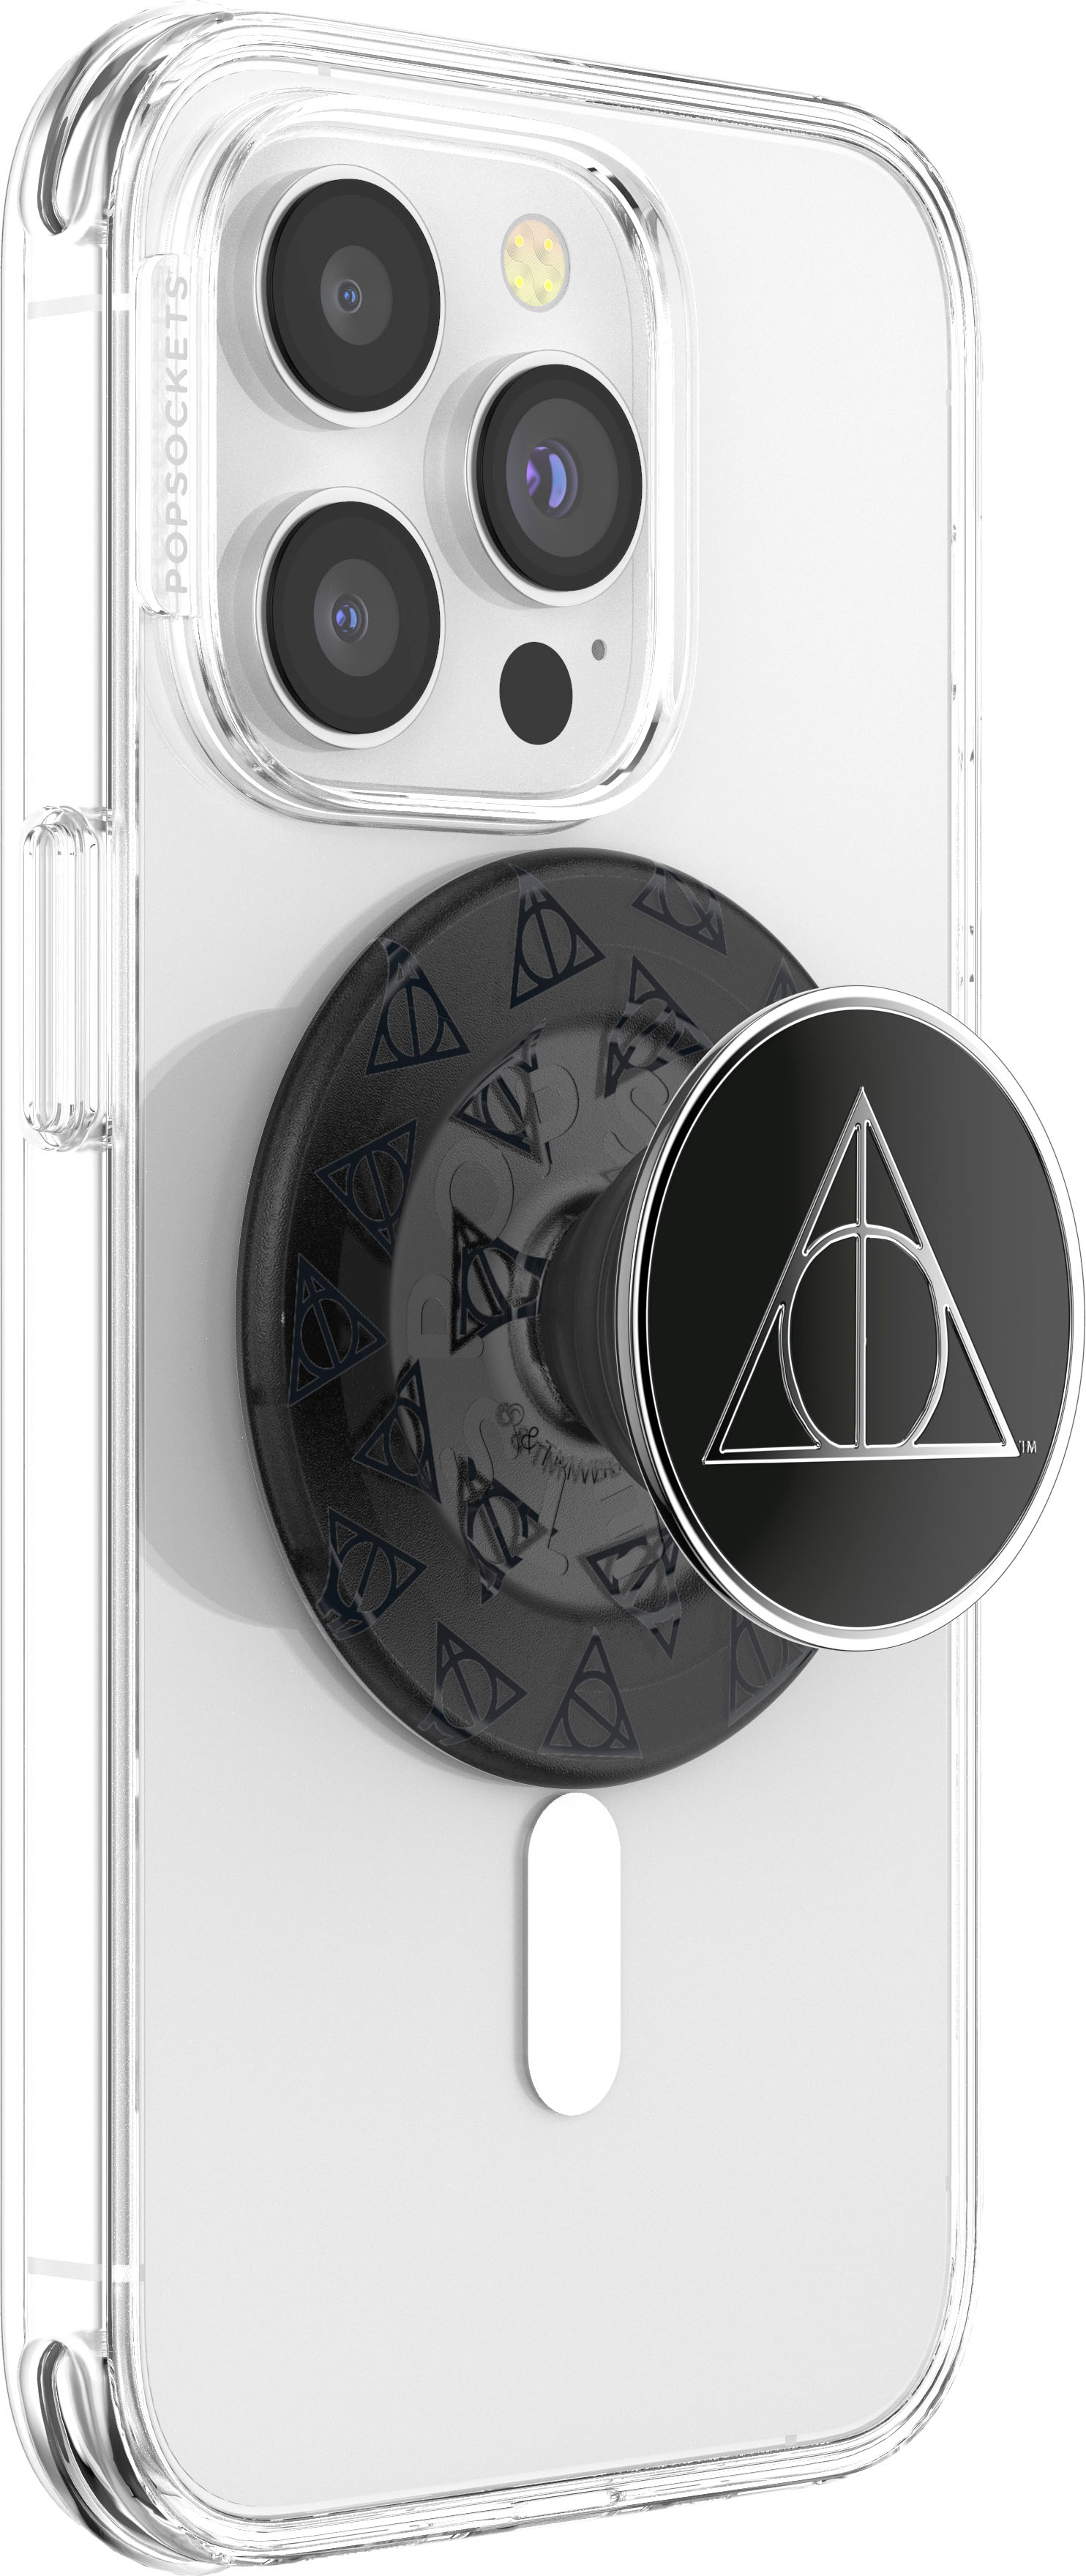 Popsocket 2-in-1 Stand and Grip - Harry Potter Slytherin